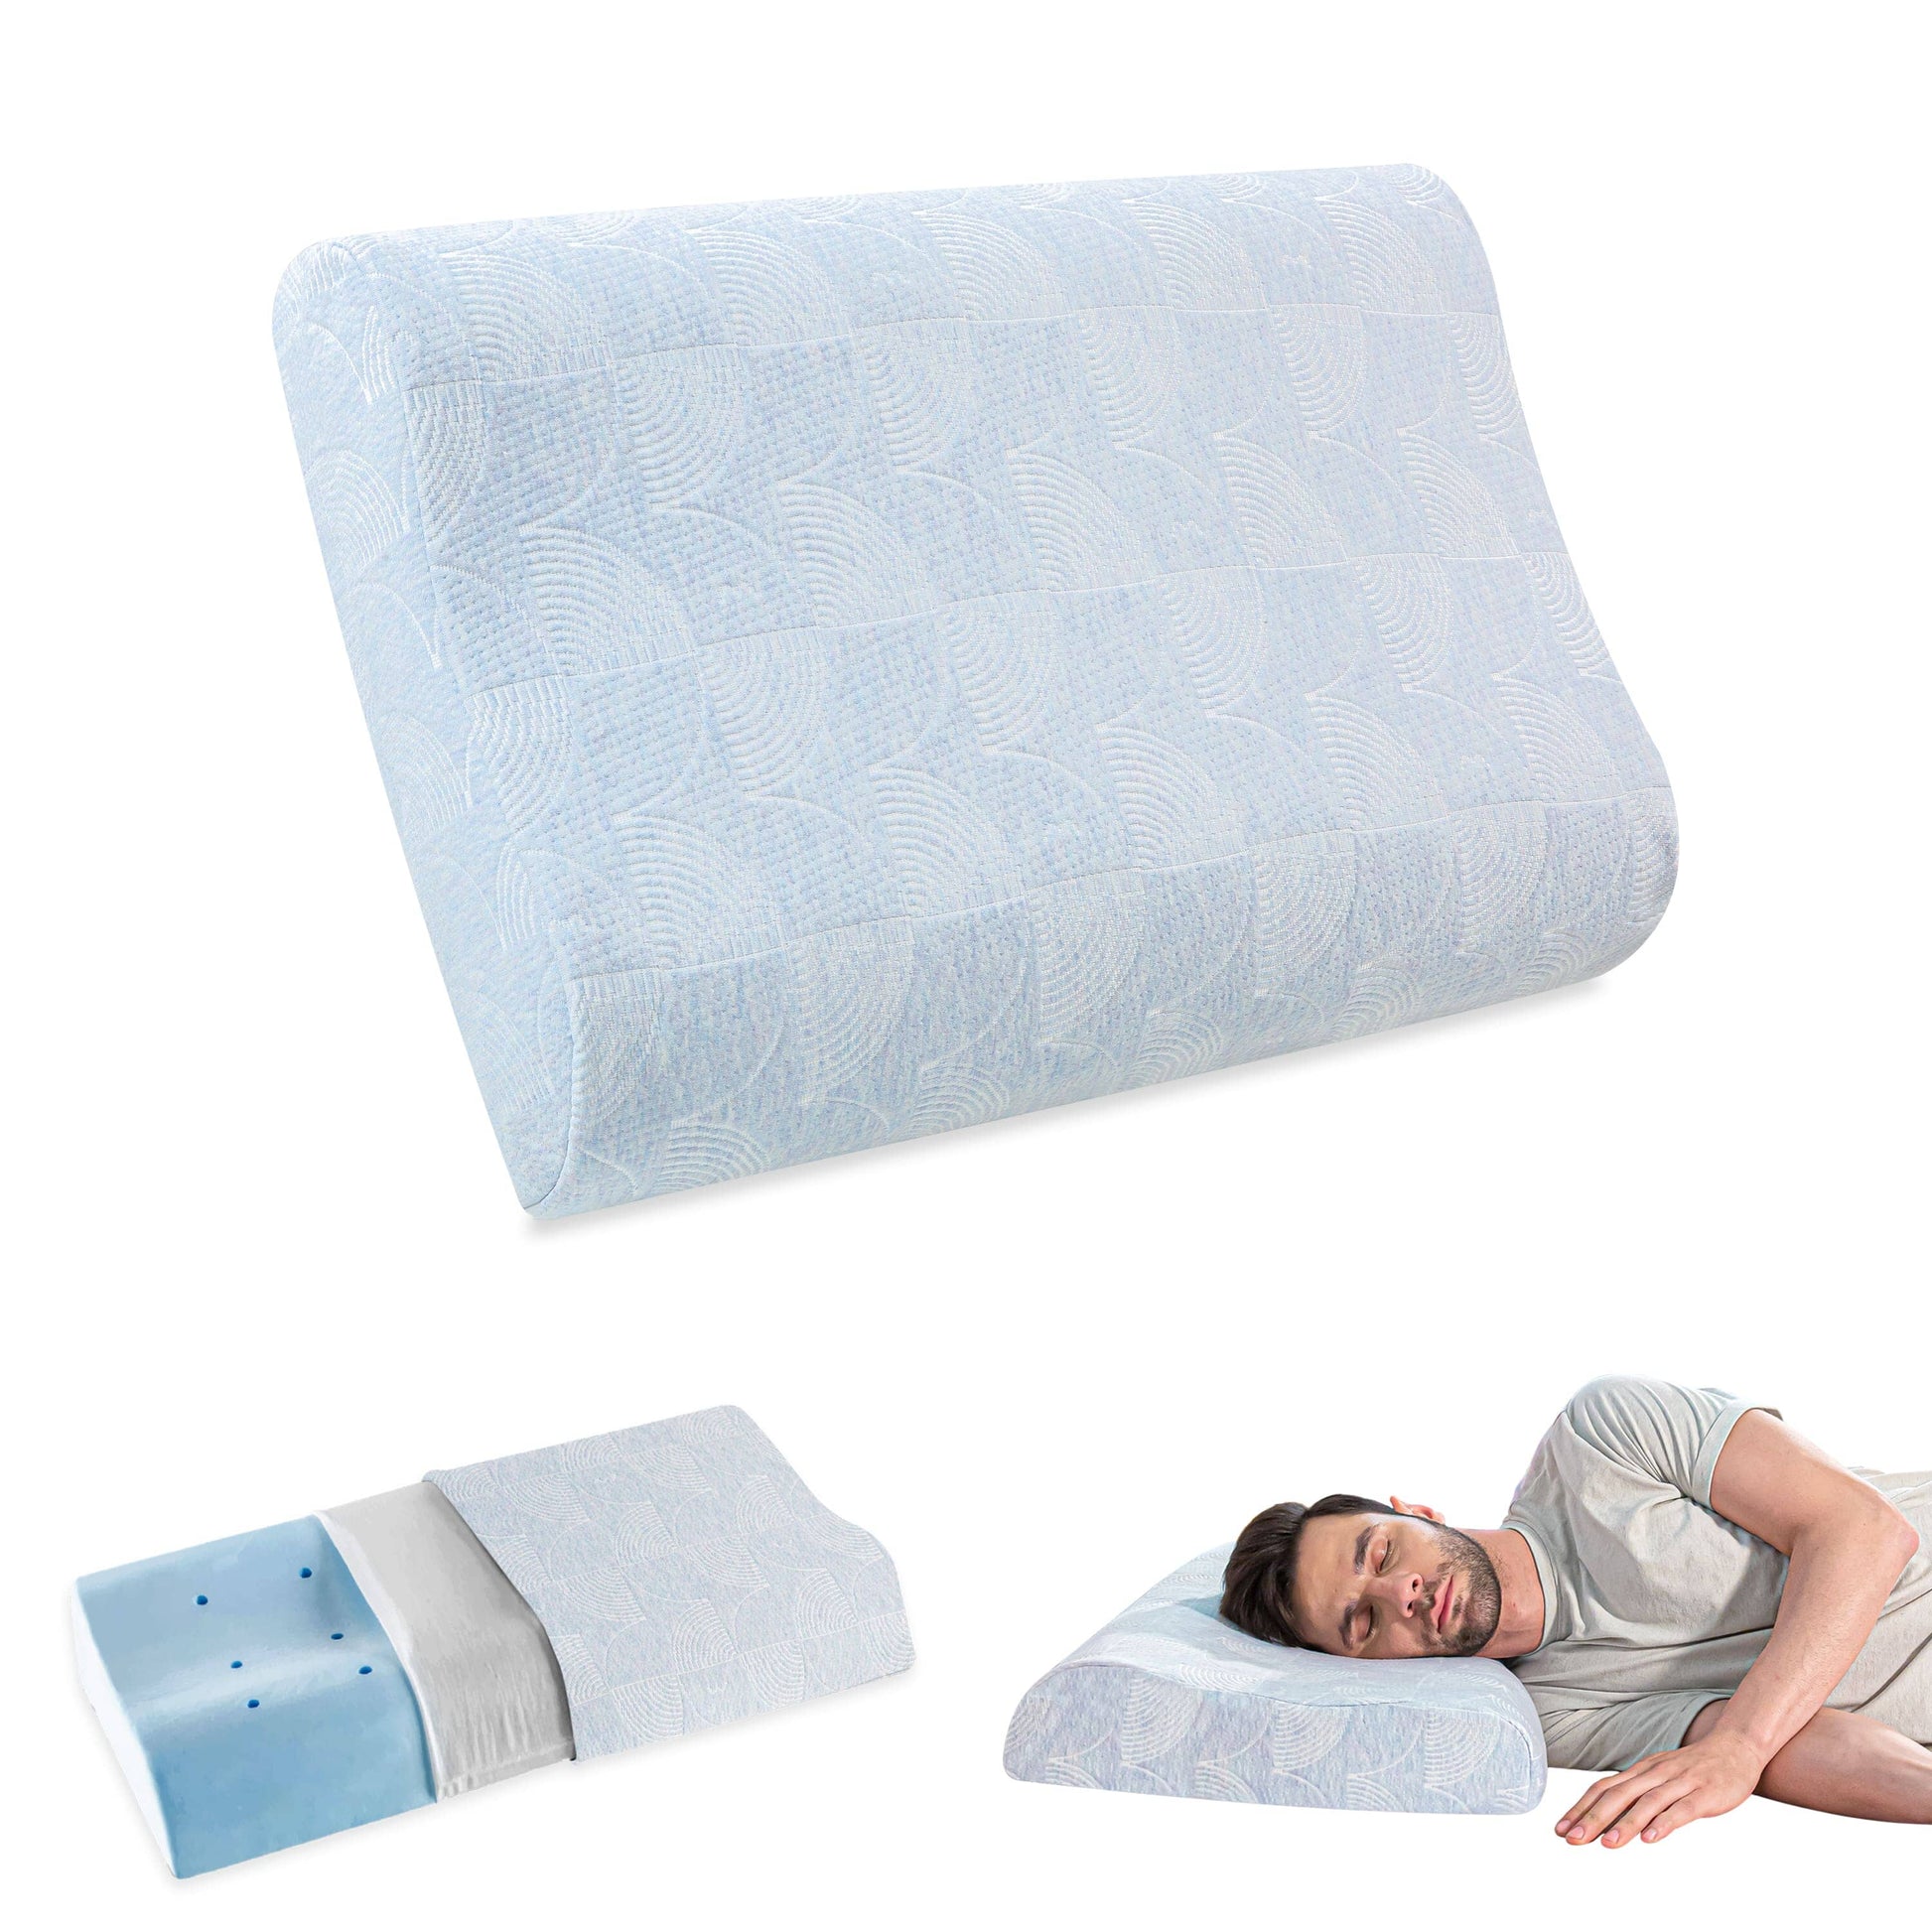 Aloe - Cooling Gel Memory Foam Cervical Pillow - Contour - Medium Firm Contour Pillow The White Willow X-Small Green 1